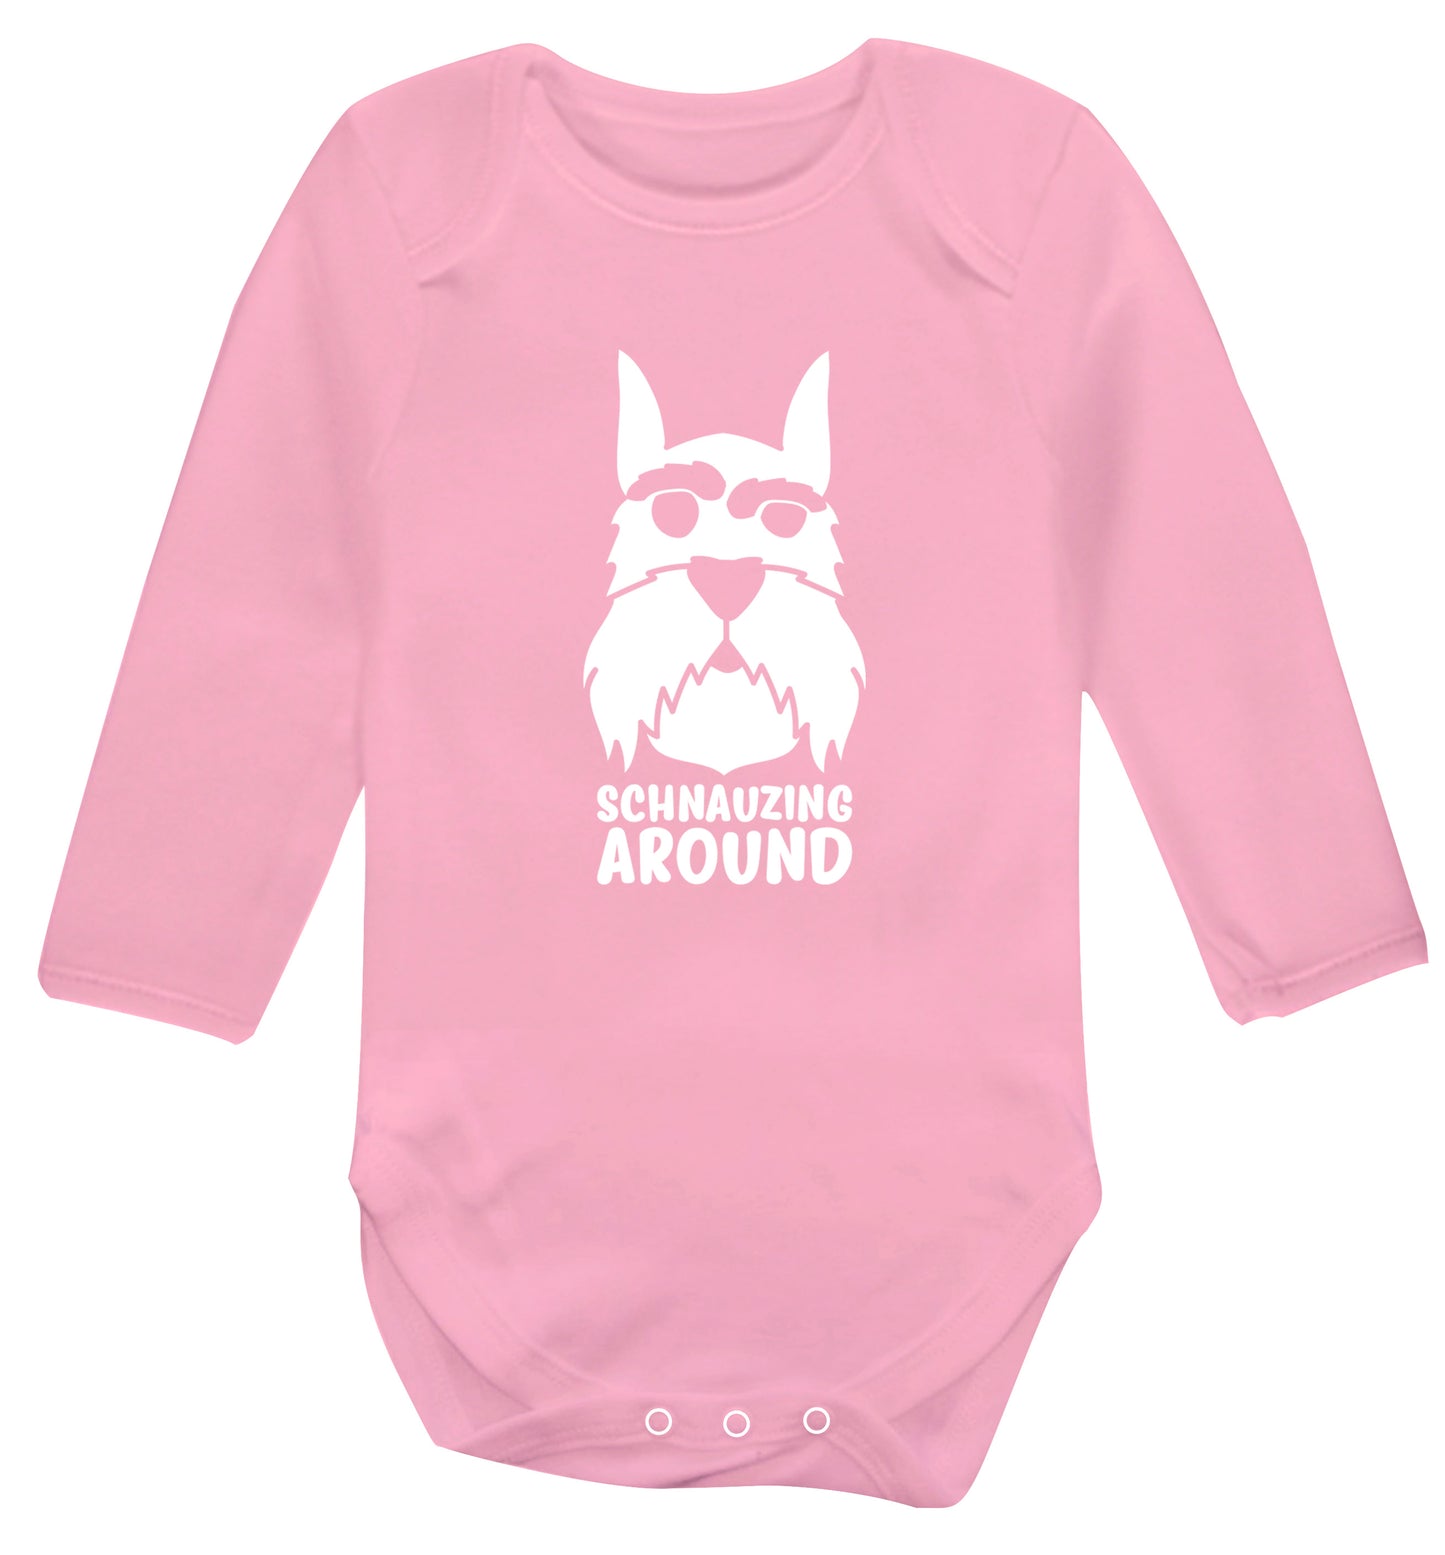 Schnauzing Around Baby Vest long sleeved pale pink 6-12 months